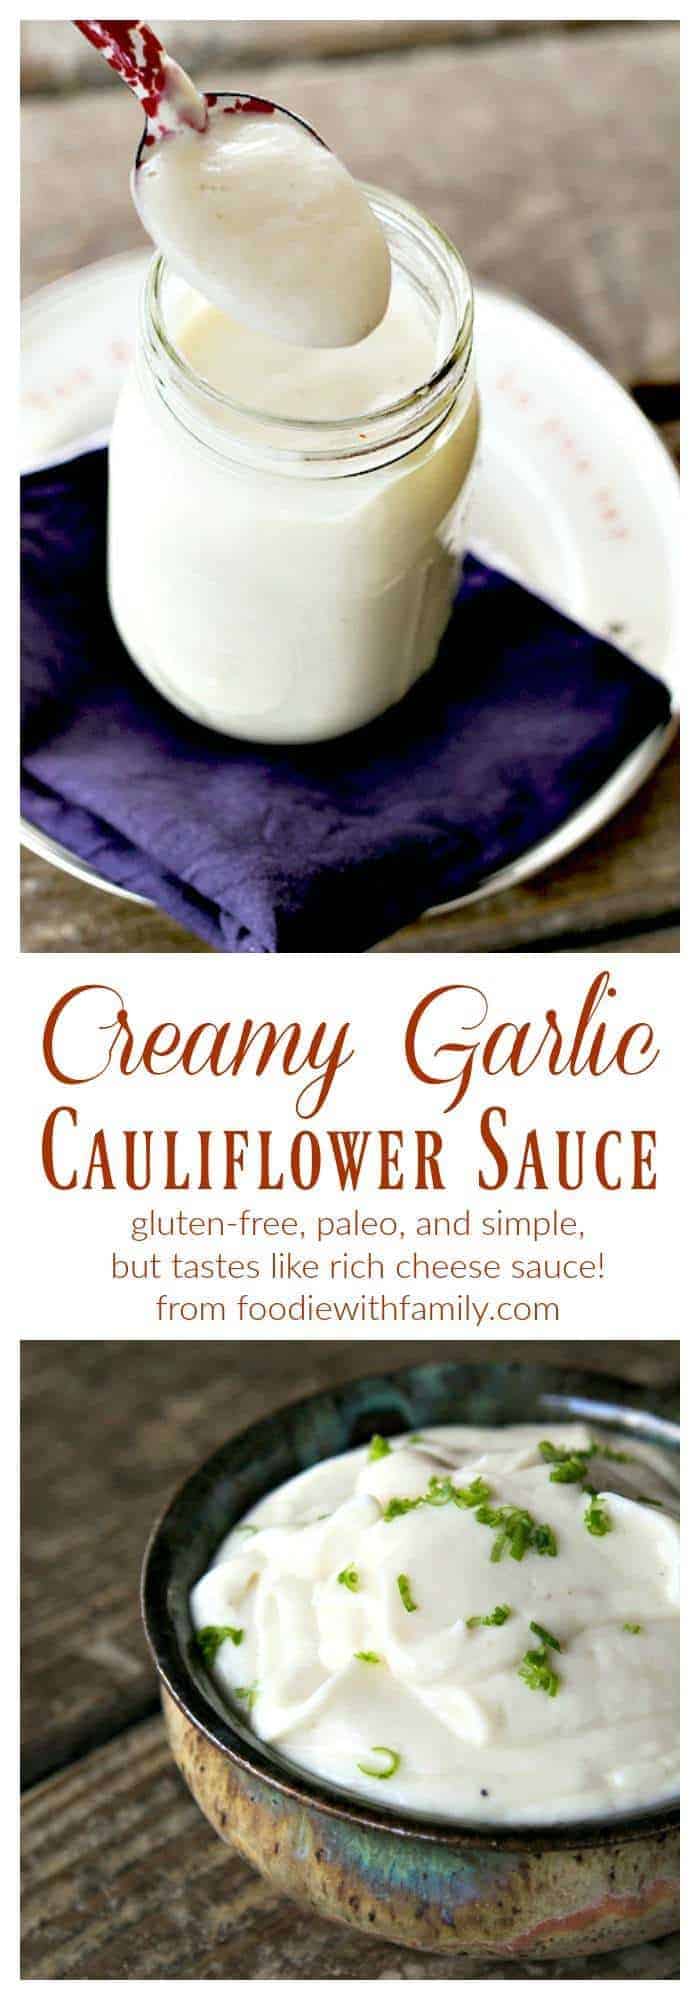 Creamy Garlic Cauliflower Sauce is gluten-free, paleo, and vegan but tastes like rich cheese sauce. It is made easily in your blender.